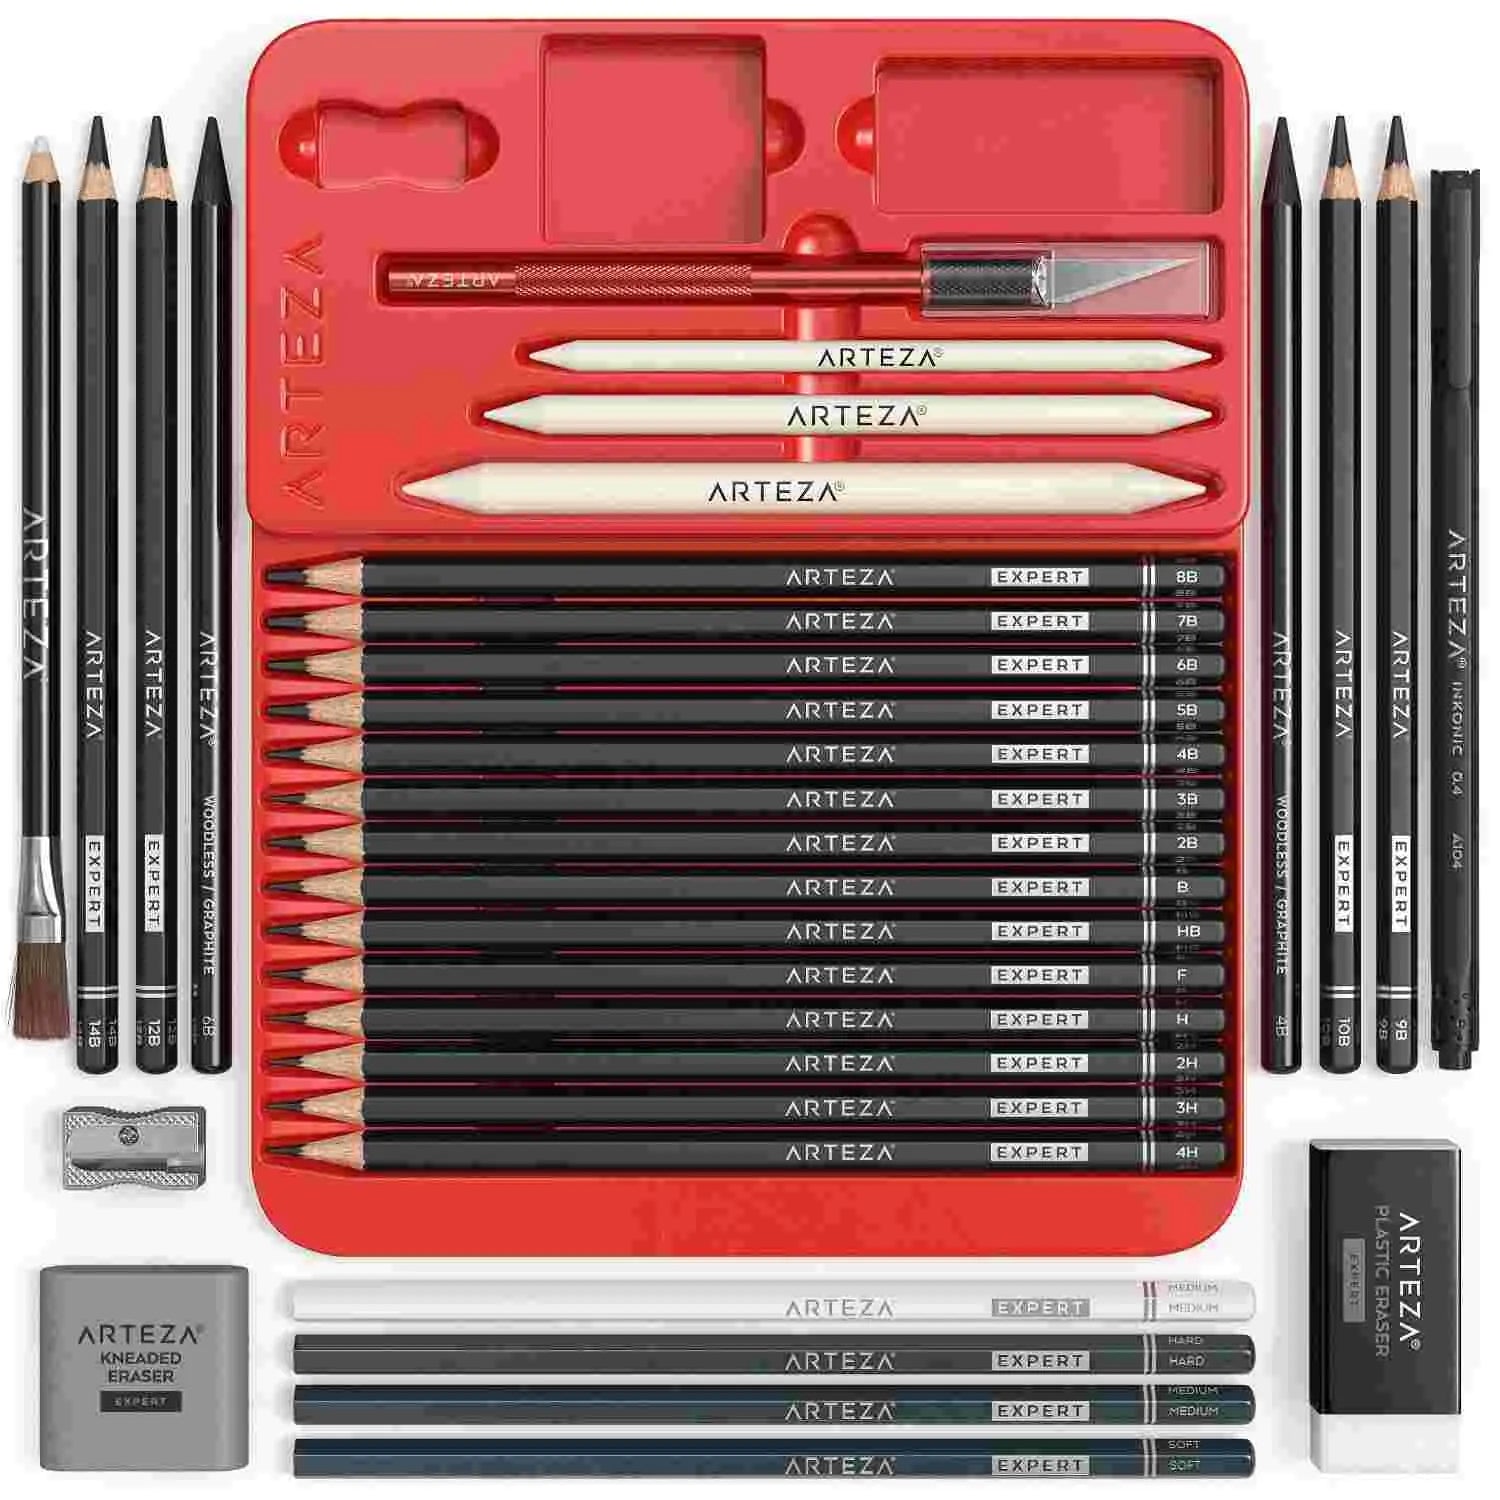 US Art Supply 54-Piece Drawing & Sketching Art Set with 4 Sketch Pads (242  Paper Sheets) -Ultimate Artist Kit, Graphite and Charcoal Pencils & Sticks